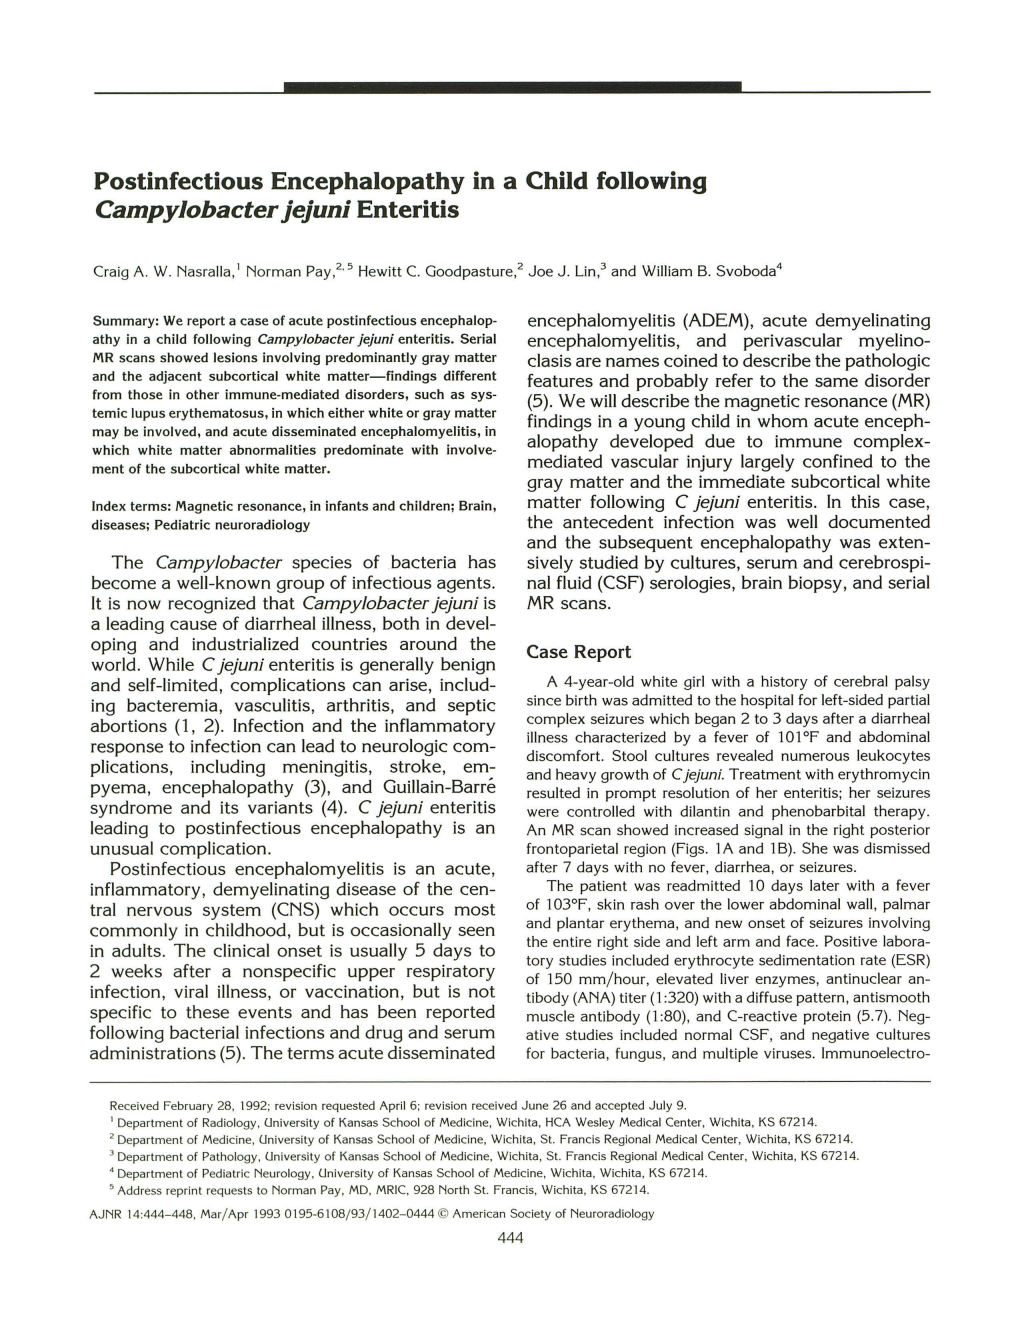 Postinfectious Encephalopathy in a Child Following Campylobacter Jejuni Enteritis